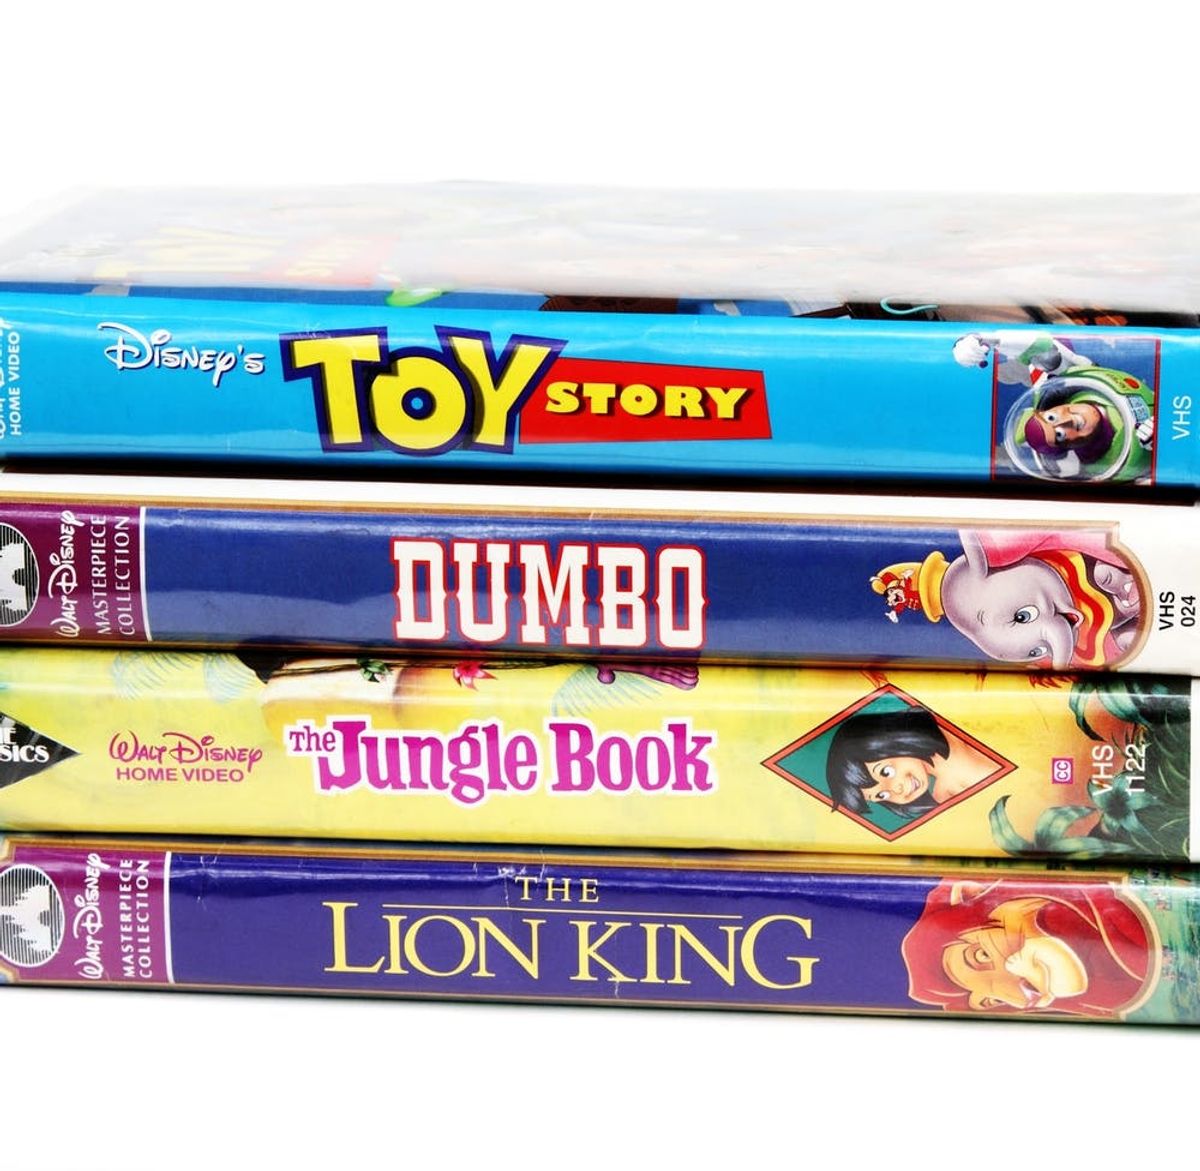 Here’s How to Cash in $10,000 from Your Old Disney Tapes